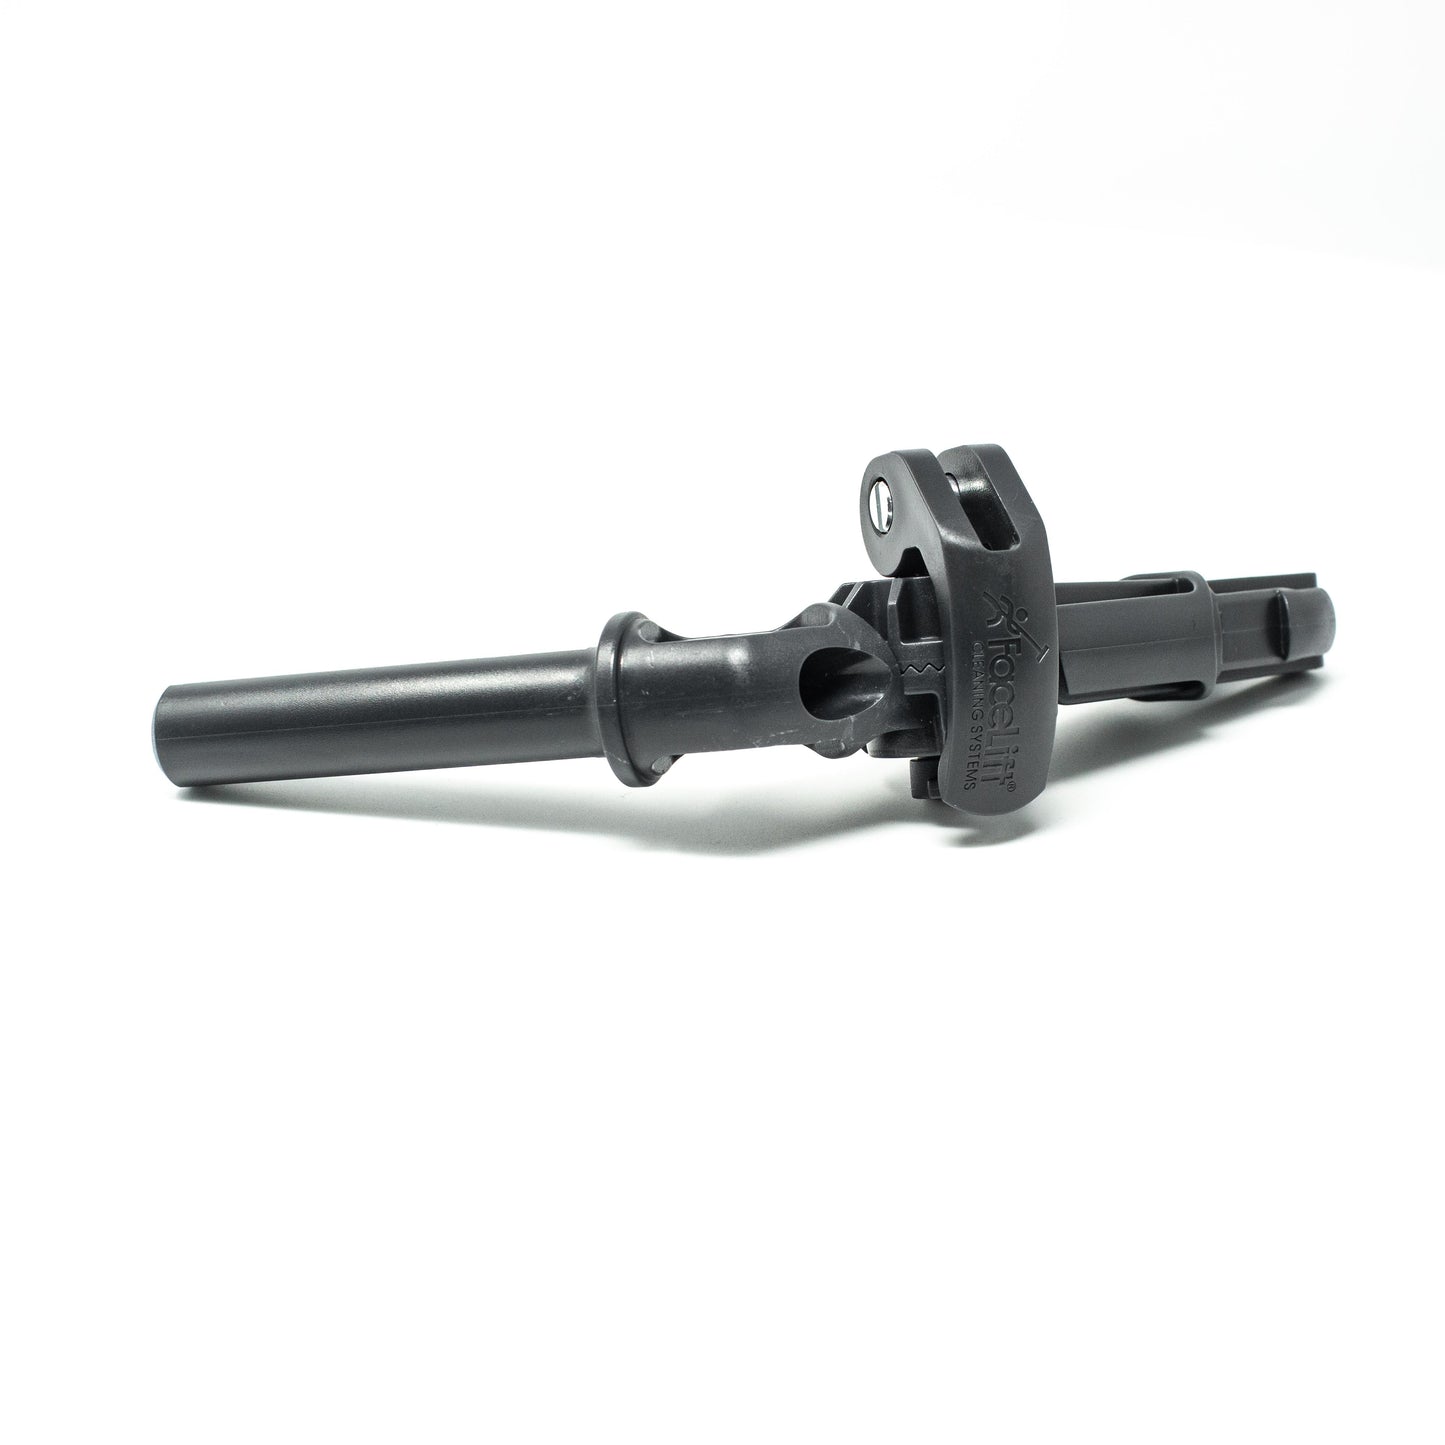 FaceLift® Precision Angle Adapter